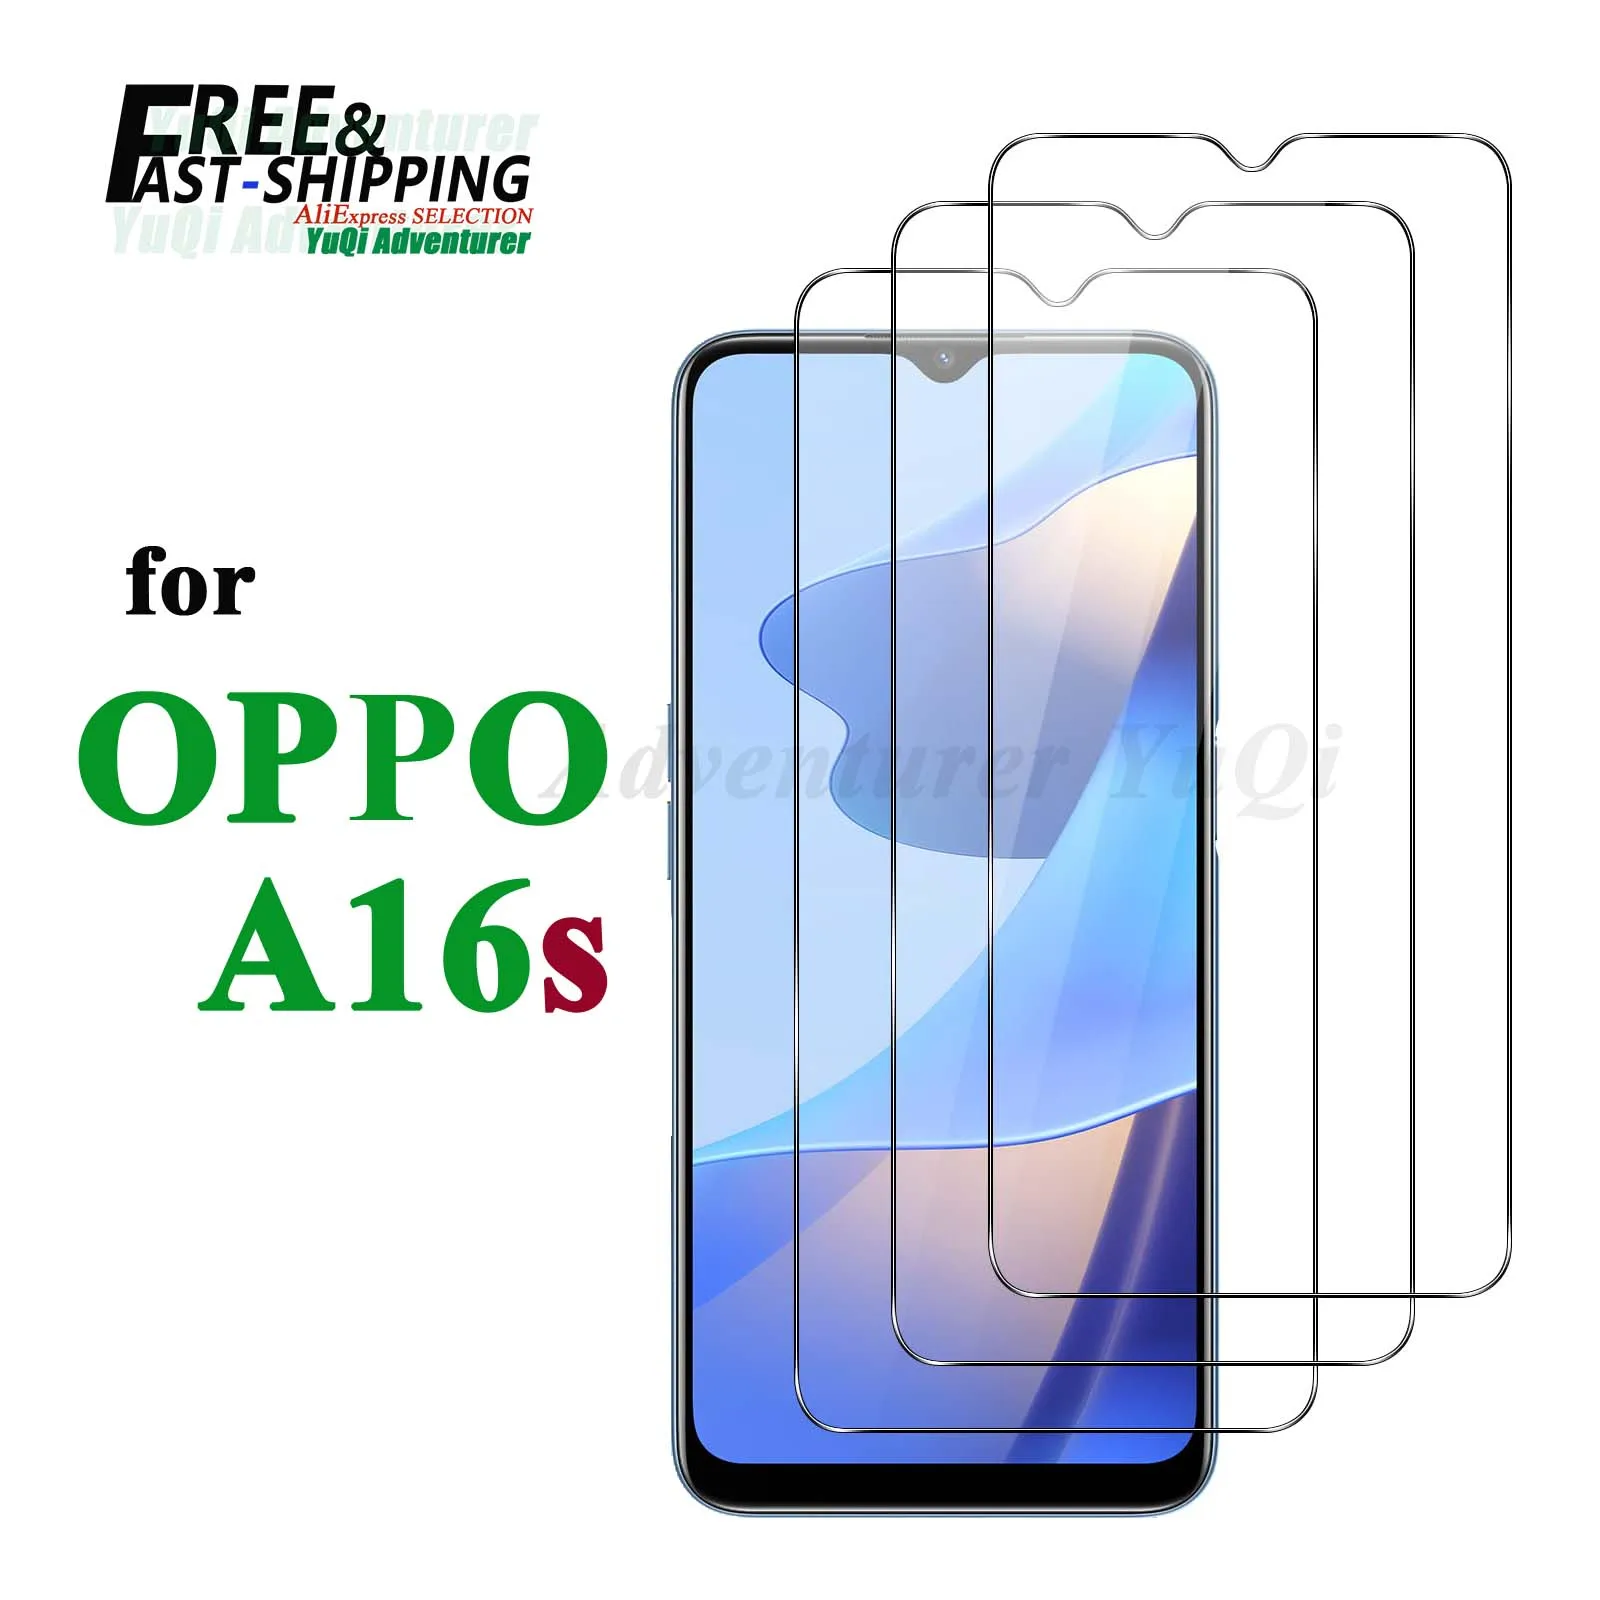 Screen Protector For OPPO A16s Tempered Glass SELECTION Free fast Shipping 9H HD Clear Transparent Case Friendly